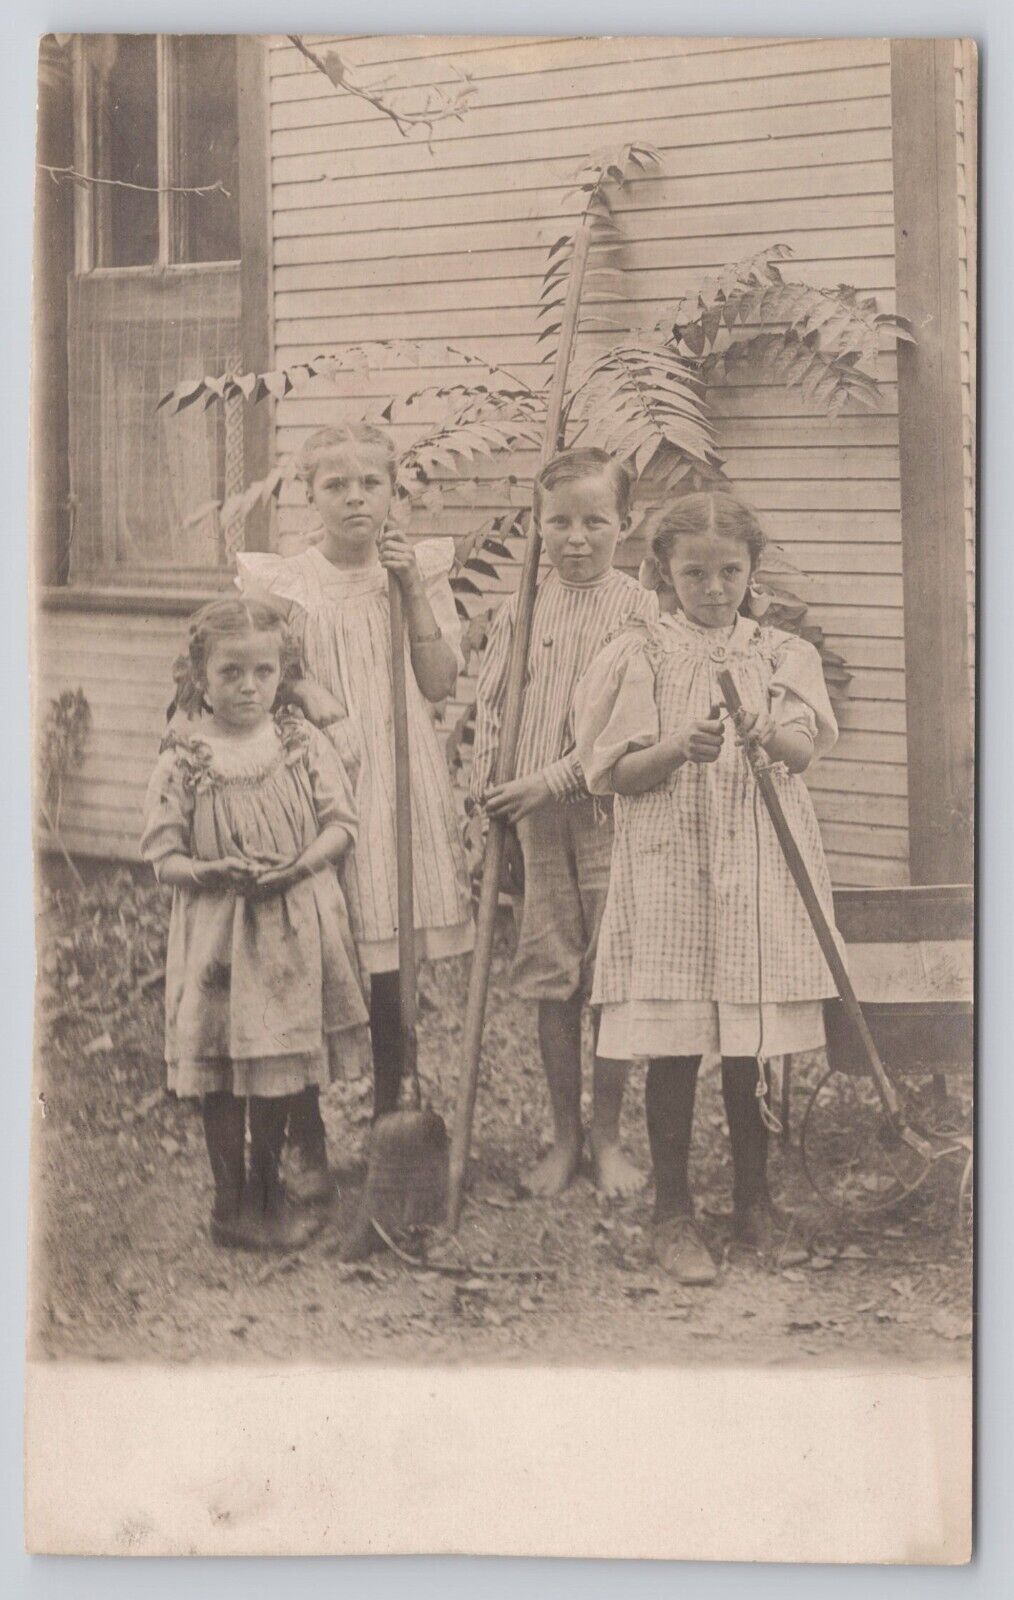 Photo of 3 Young Girls and Boy by House Postmarked Piqua Ohio 1908 RPPC Postcard